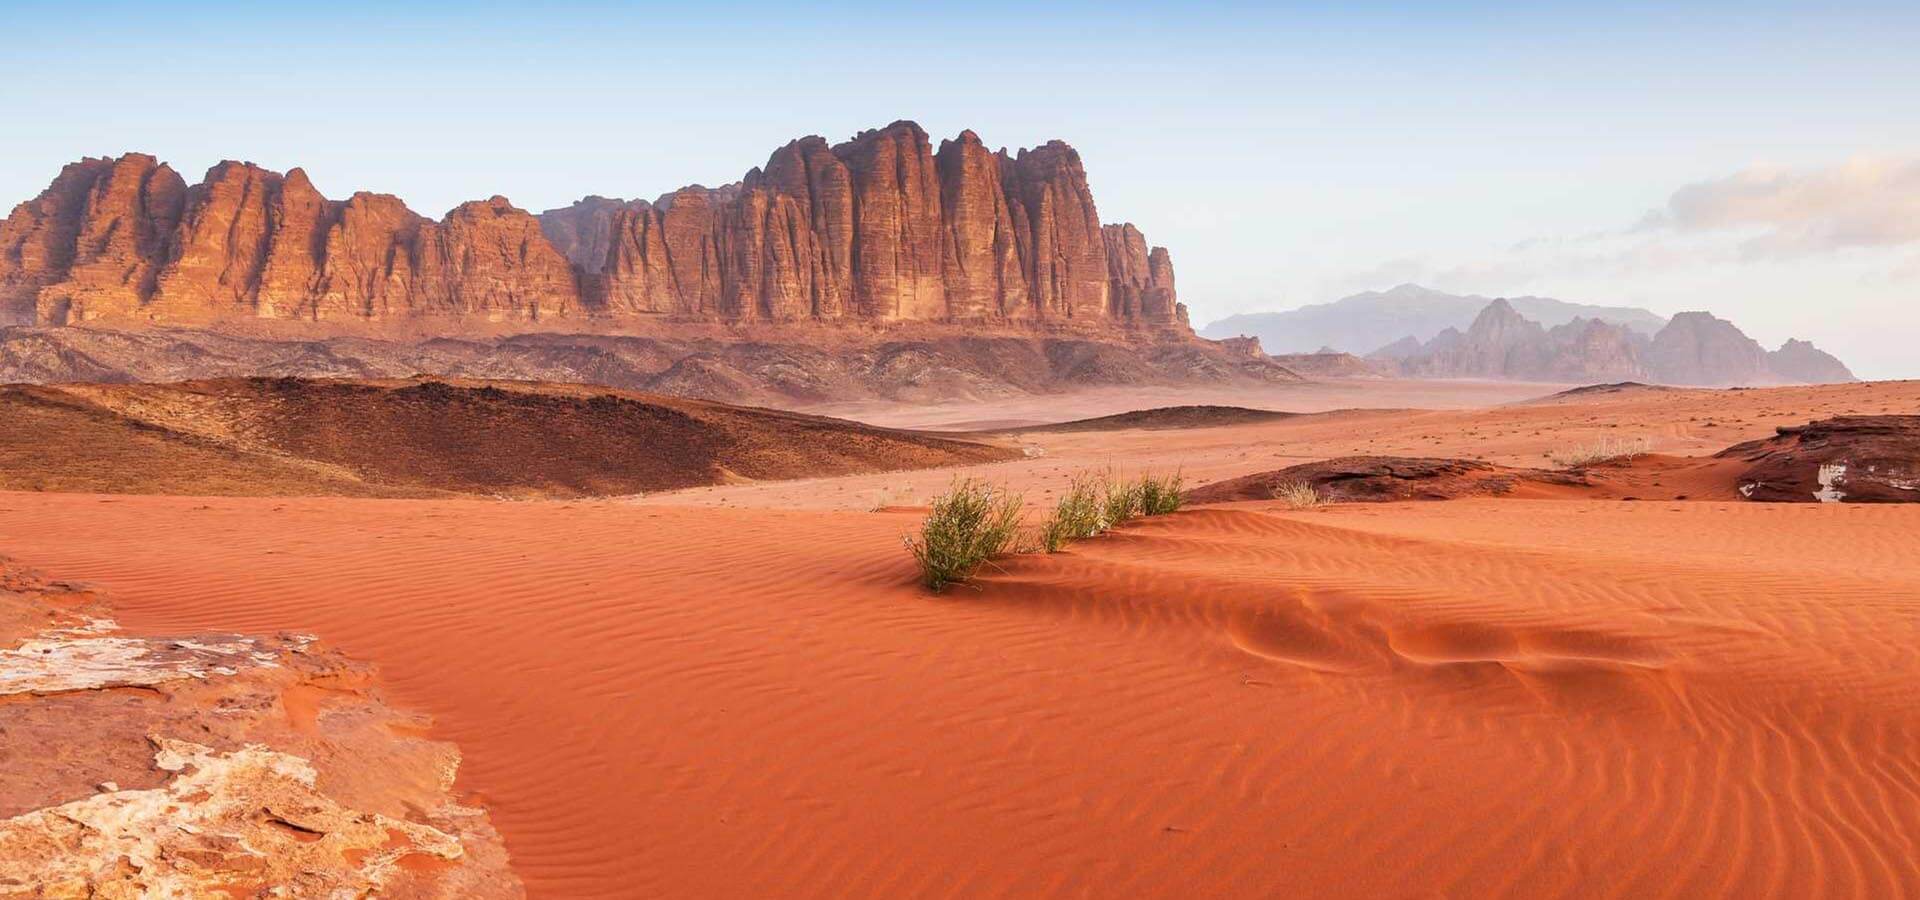 Discover the Wonders of Jordan with Exceptional Holiday Tours